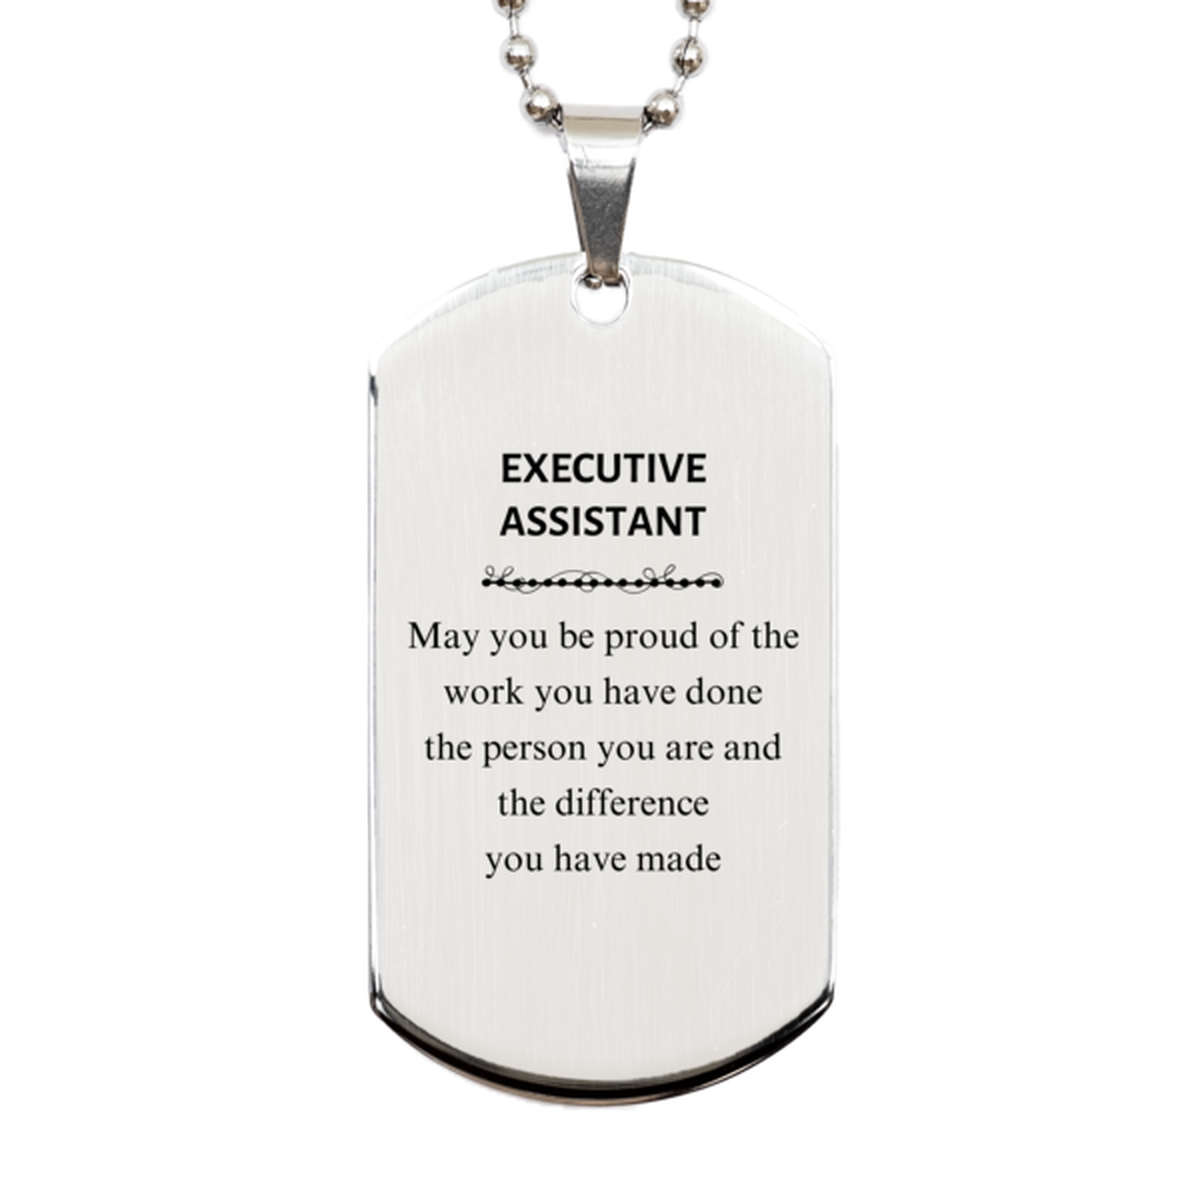 Executive Assistant May you be proud of the work you have done, Retirement Executive Assistant Silver Dog Tag for Colleague Appreciation Gifts Amazing for Executive Assistant